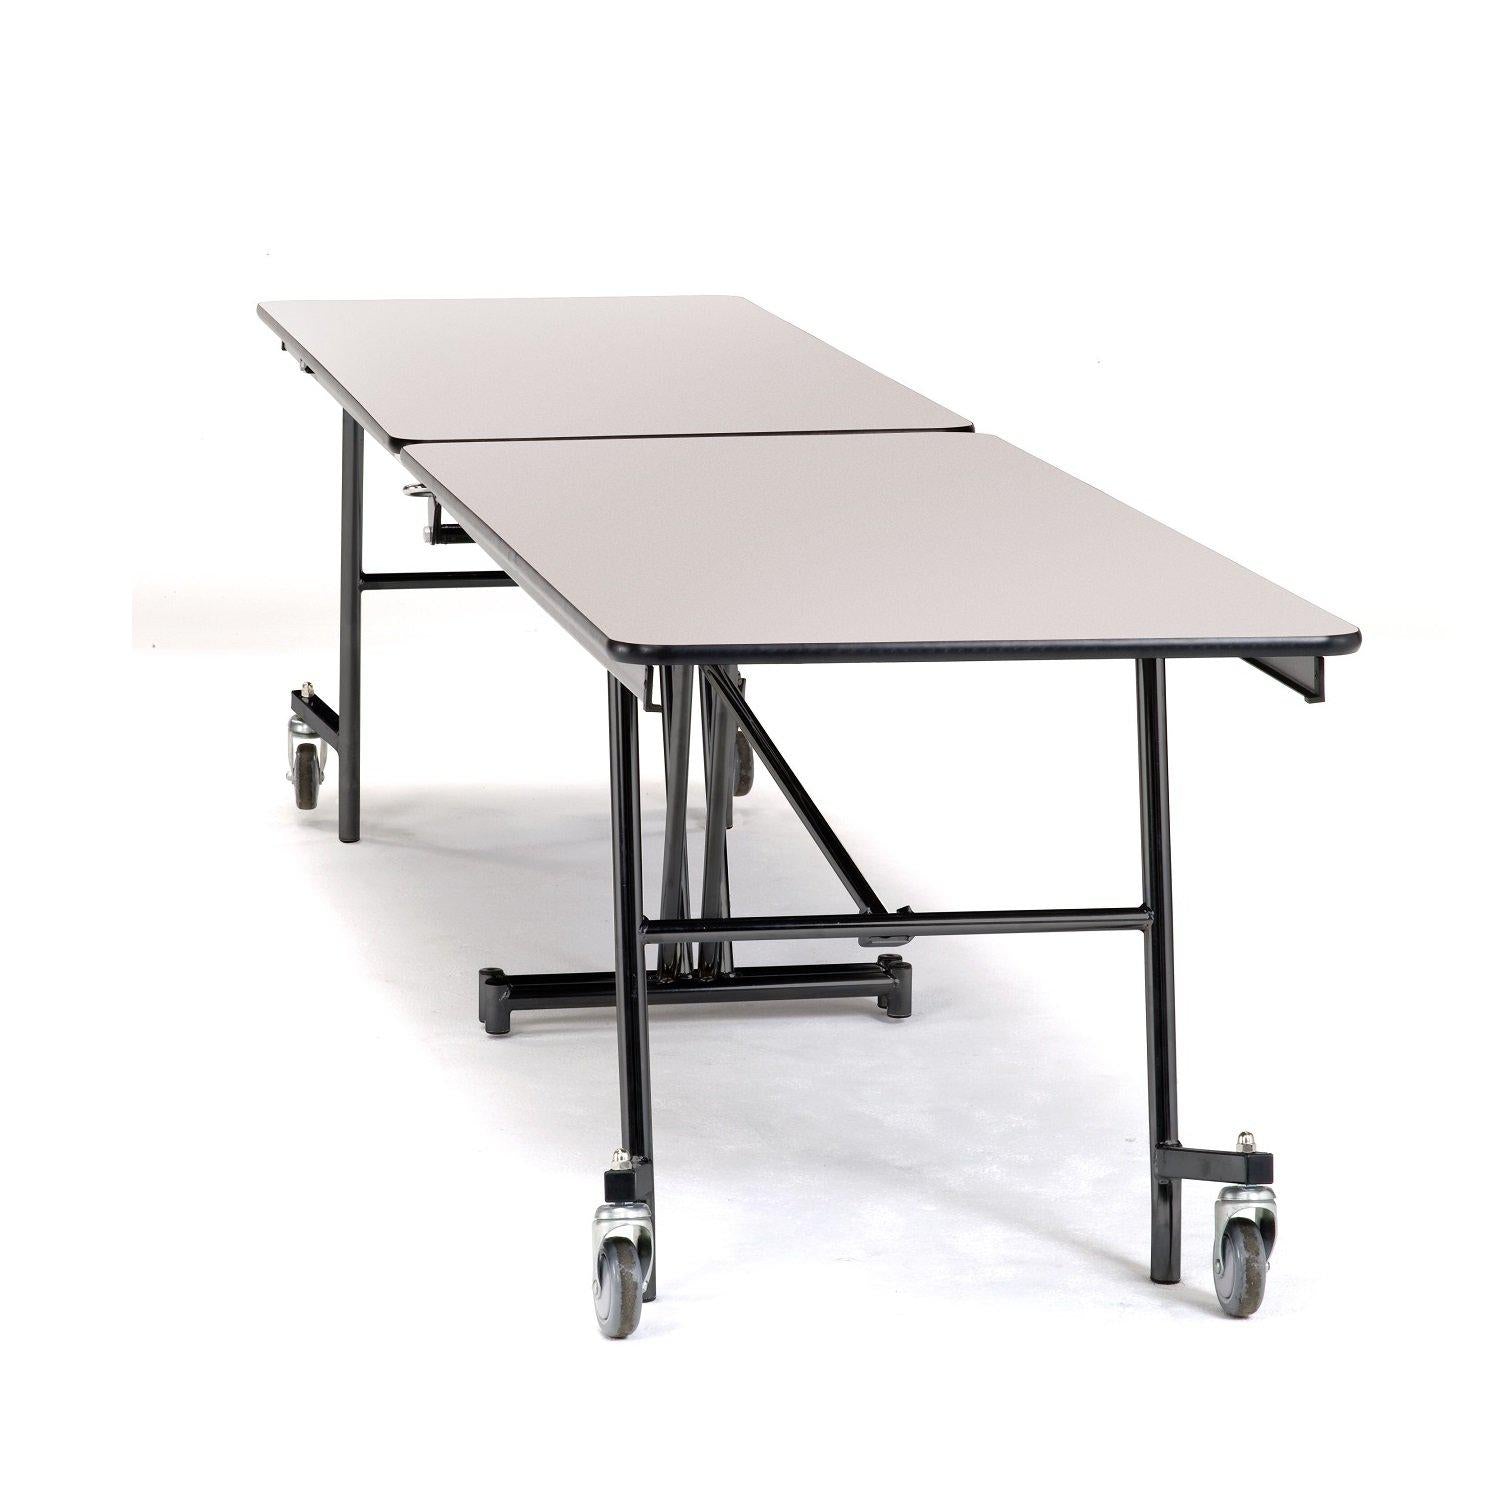 Mobile Shape Cafeteria Table, 10' Rectangle, MDF Core, Black ProtectEdge, Textured Black Frame